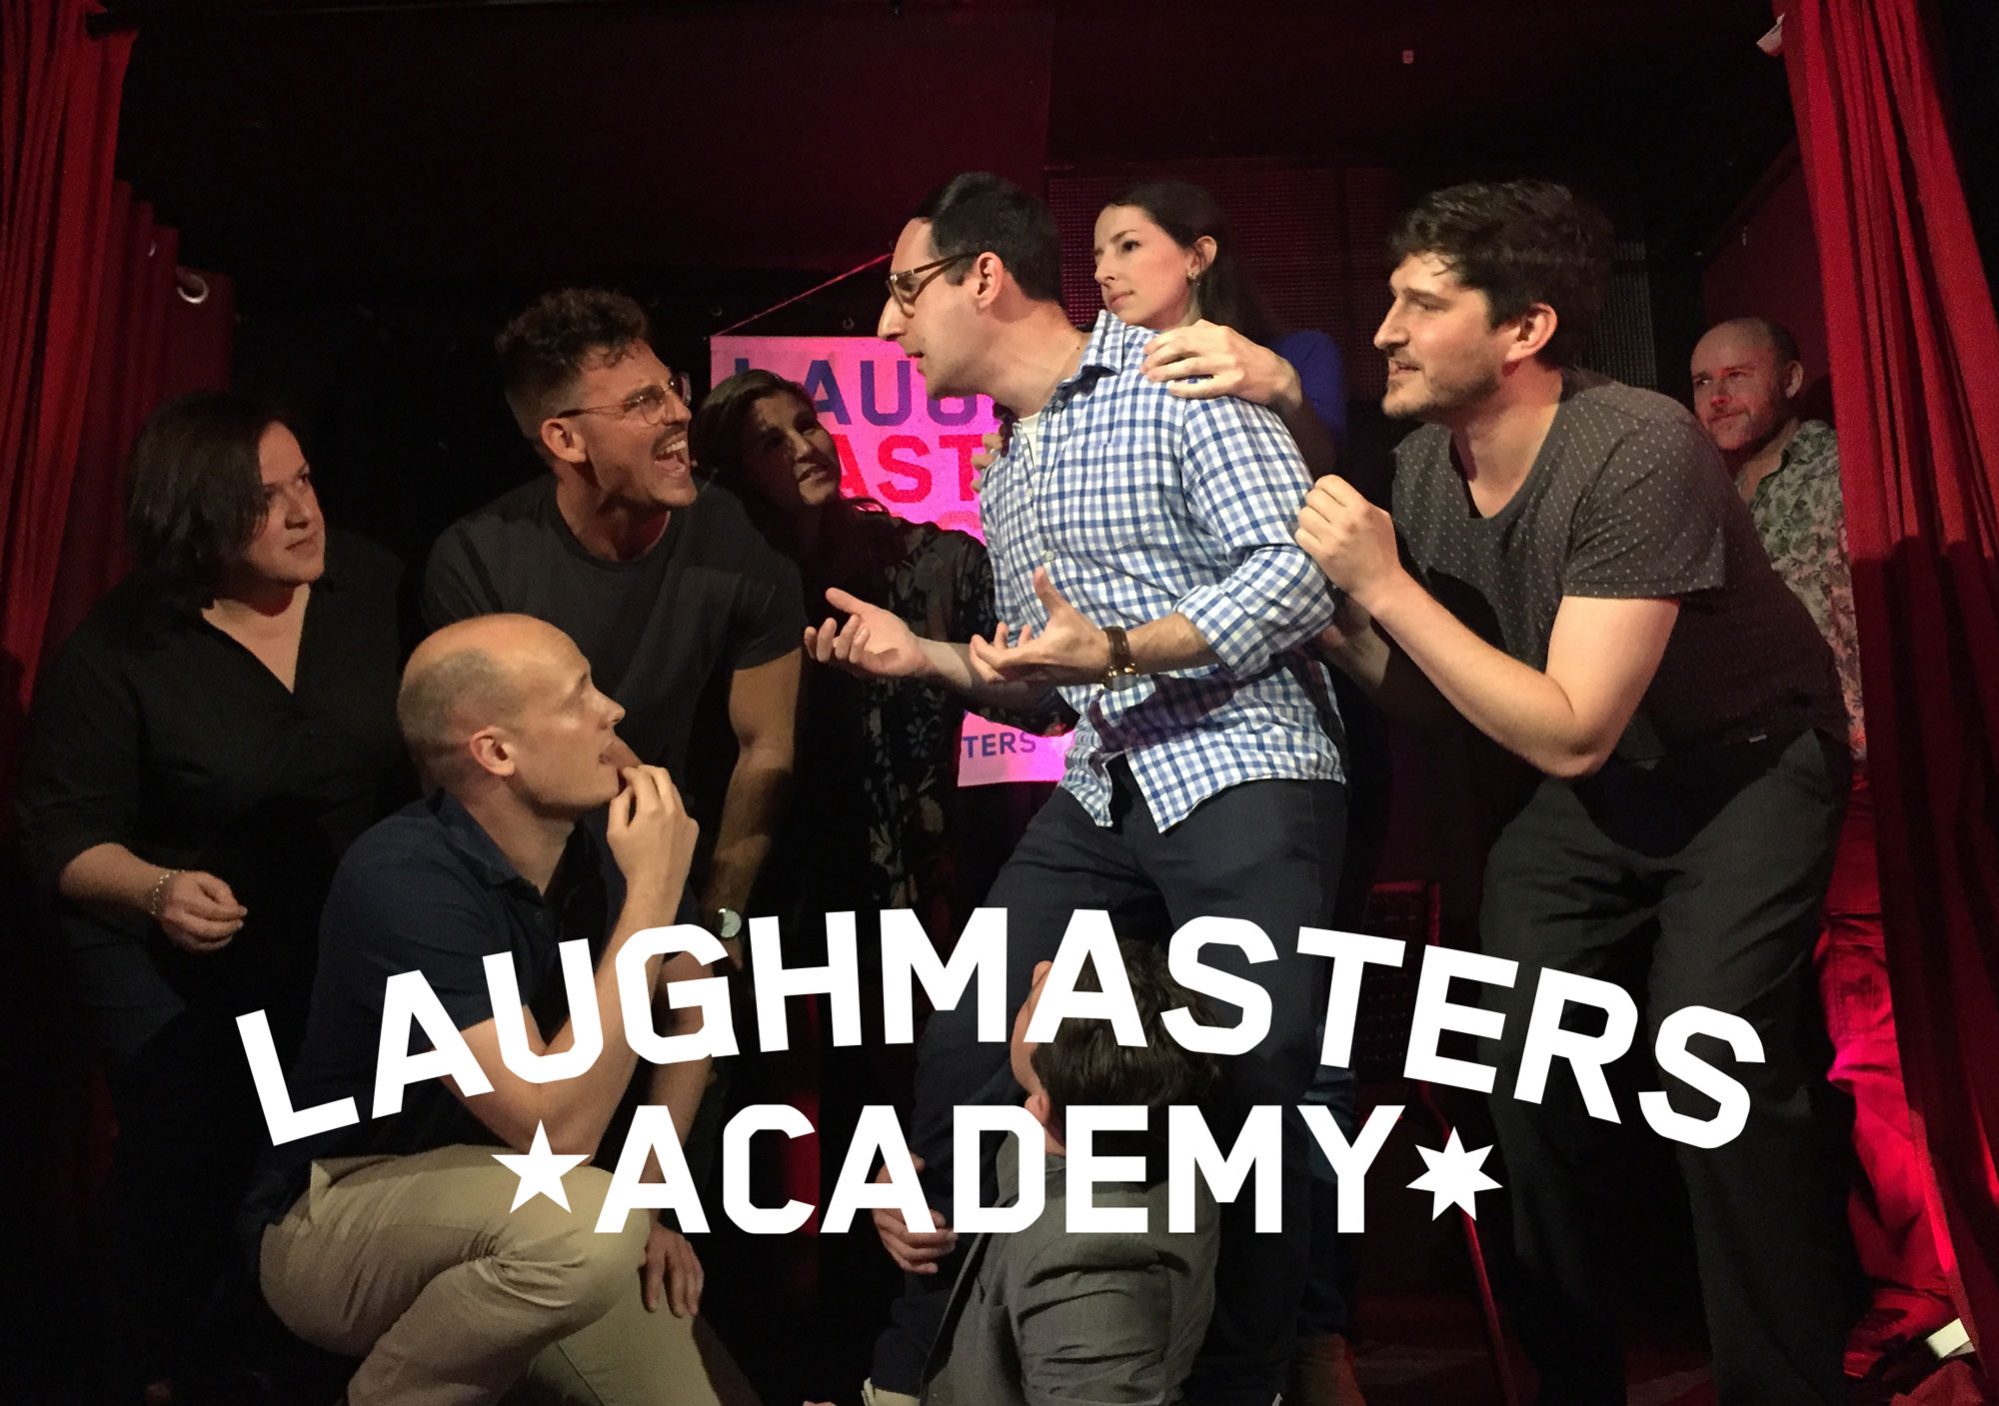 Contact Us. Laugh Masters Academy Improv and Sketch Comedy Classes in Sydney and Melbourne, Australia for Improv Theatre Sydney, Academy of Improvisation, Impro Academy, conspiracy, improv classes near me